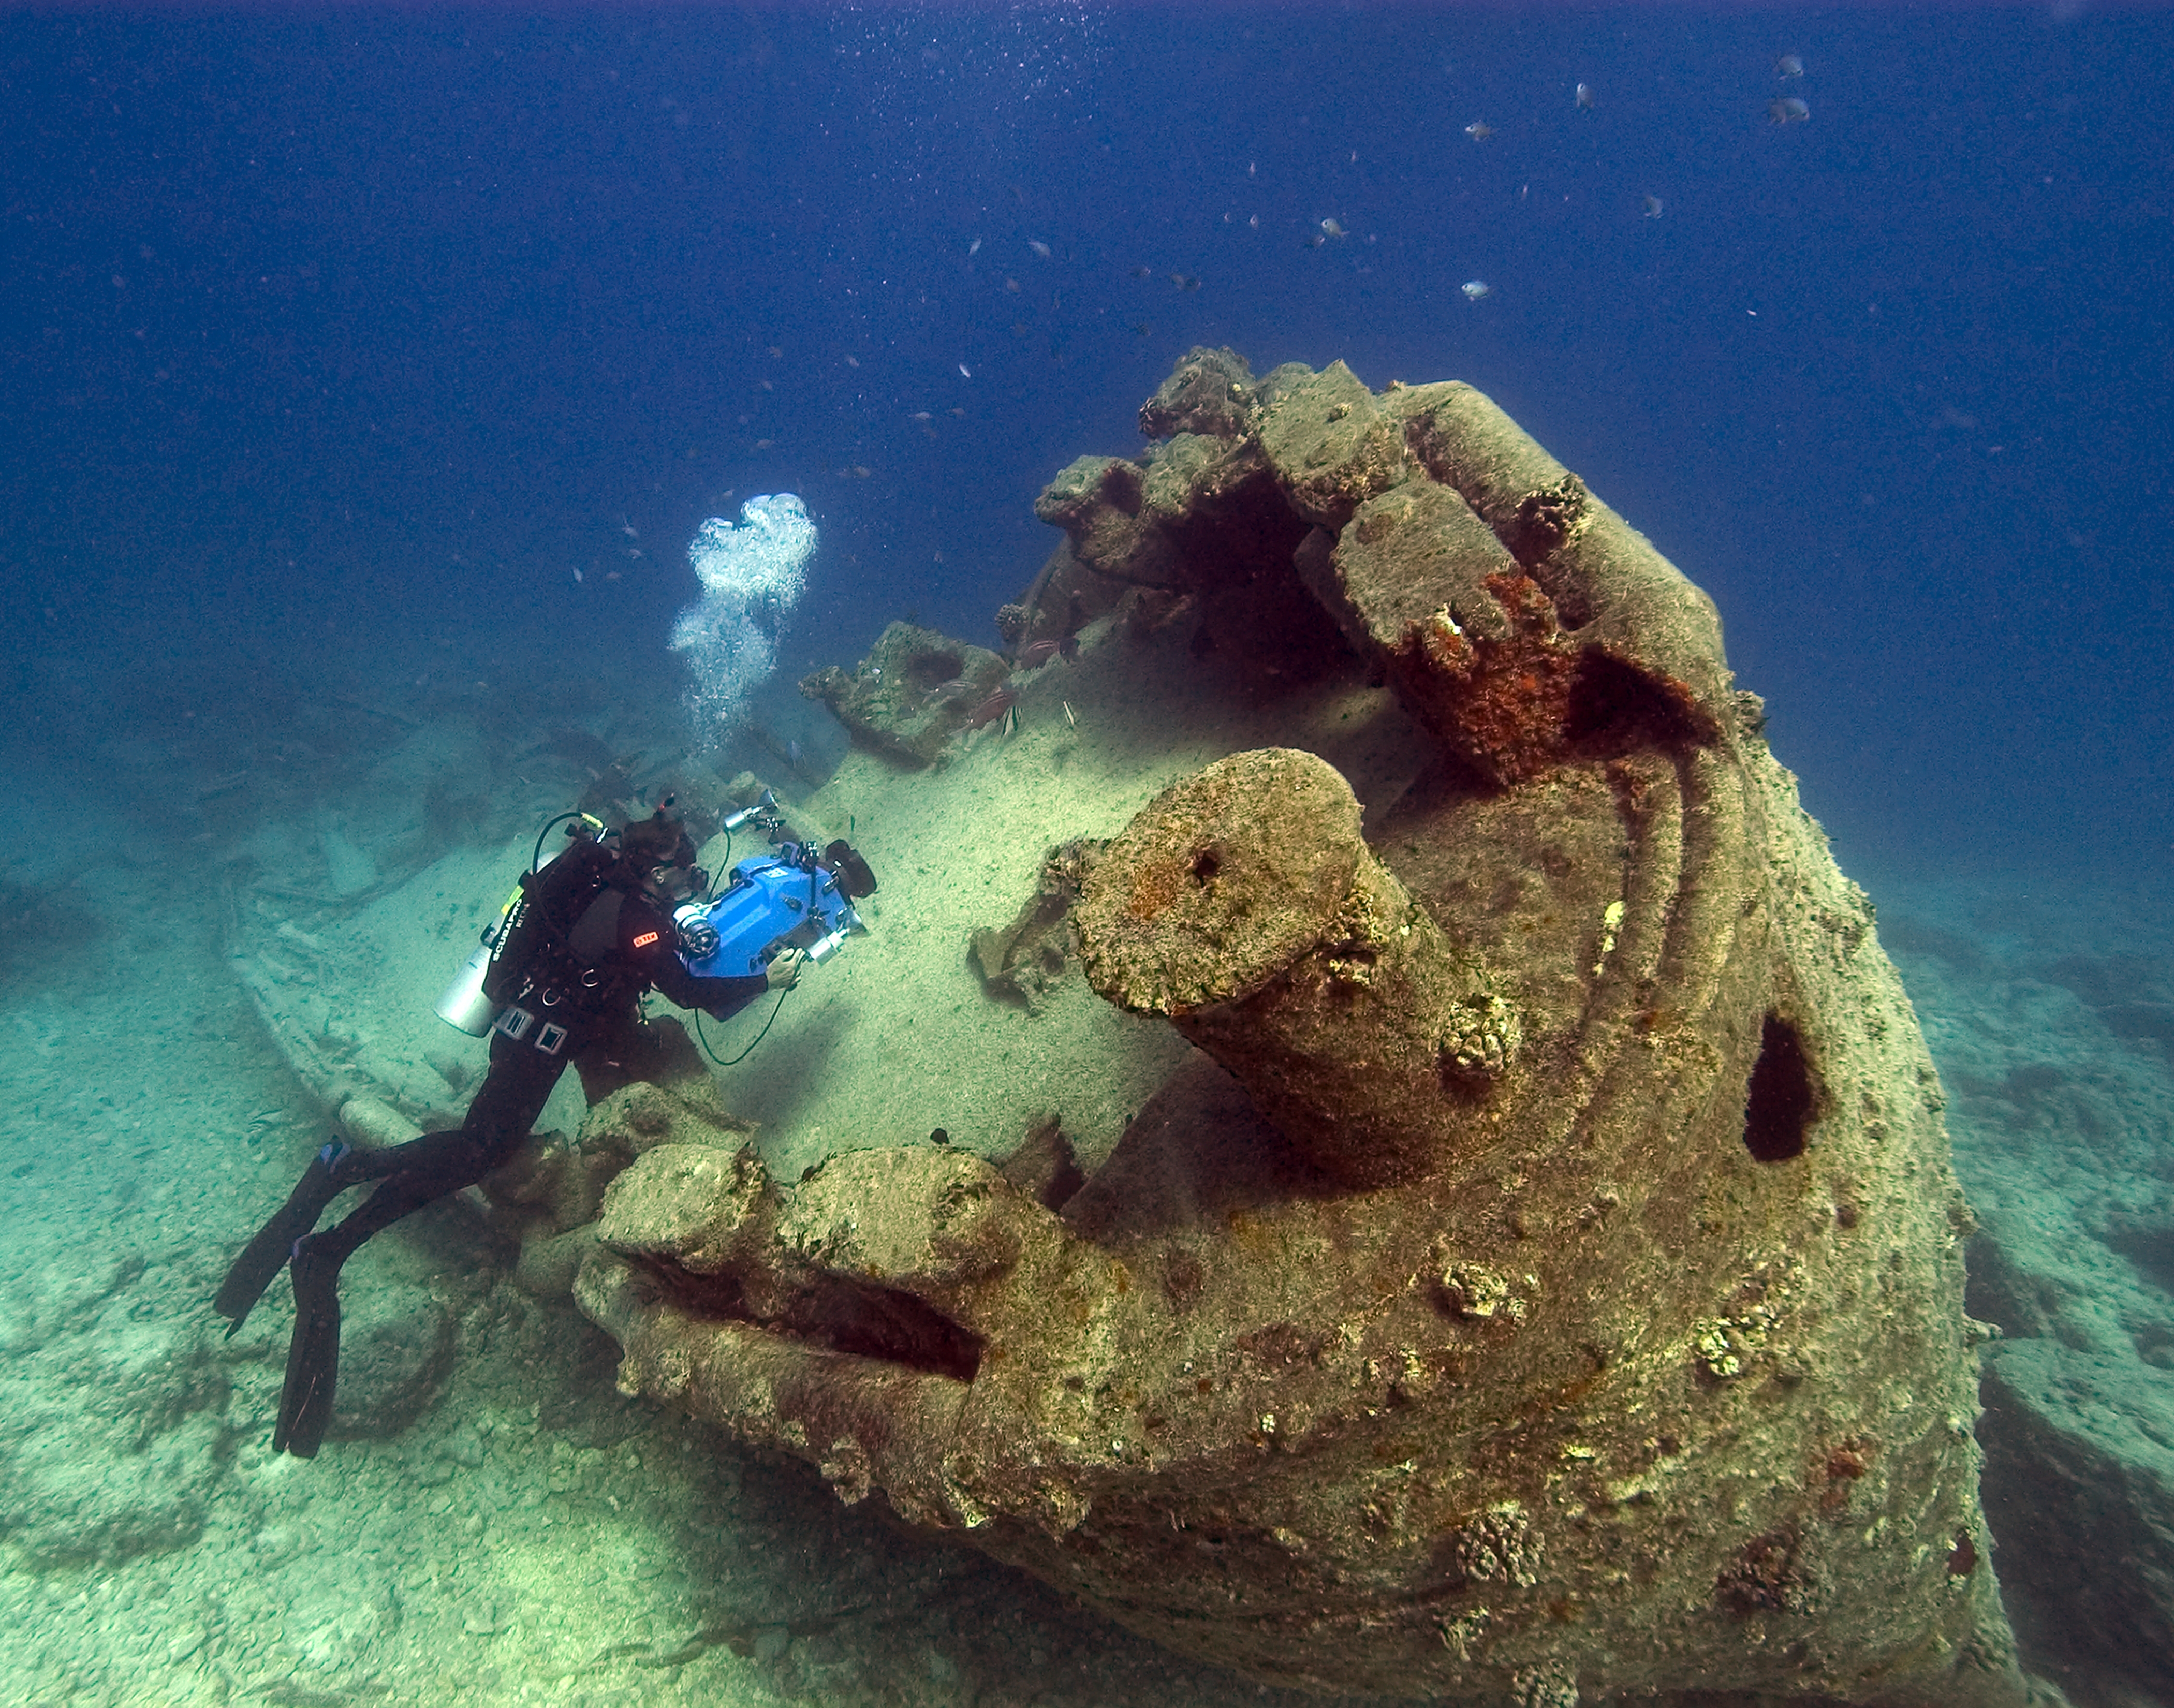 A recent Ocean Exploration webinar looked at sunken history from WWII at Midway Island, Hawaii,  like the remains of the USS Macaw. 